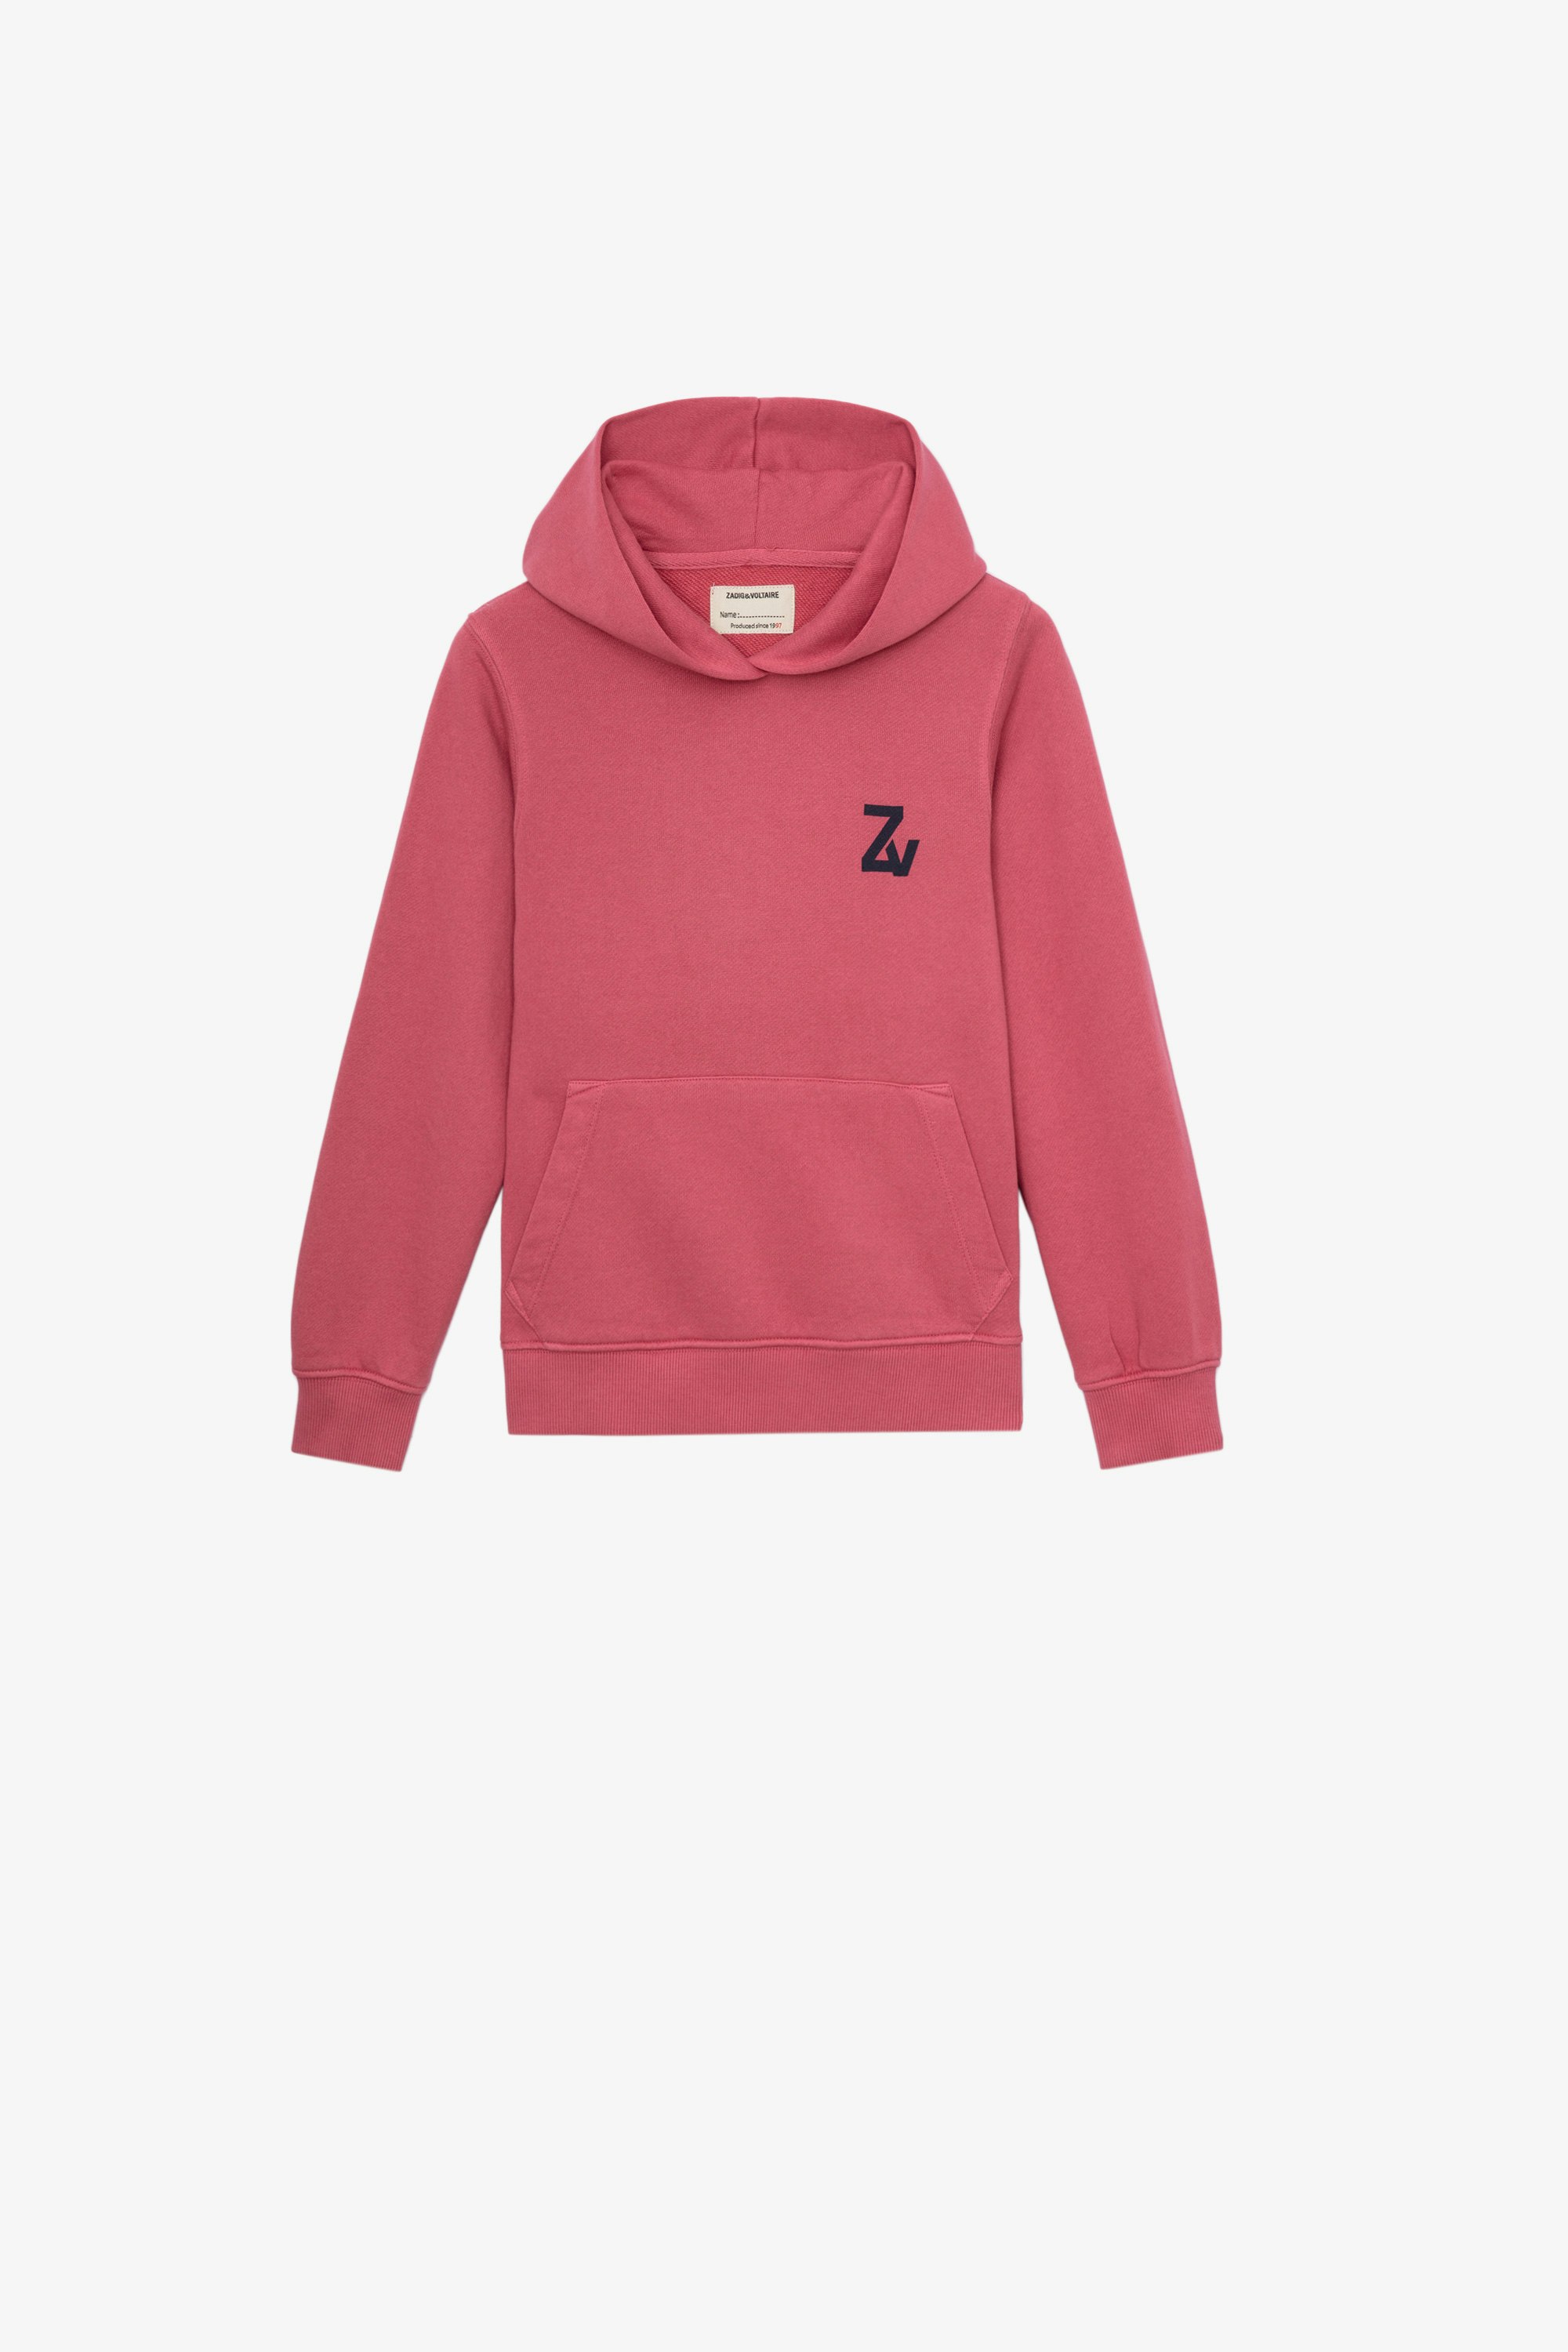 Sanchi Children’s スウェット Children’s pink cotton hoodie with ZV signature and photo print on back 